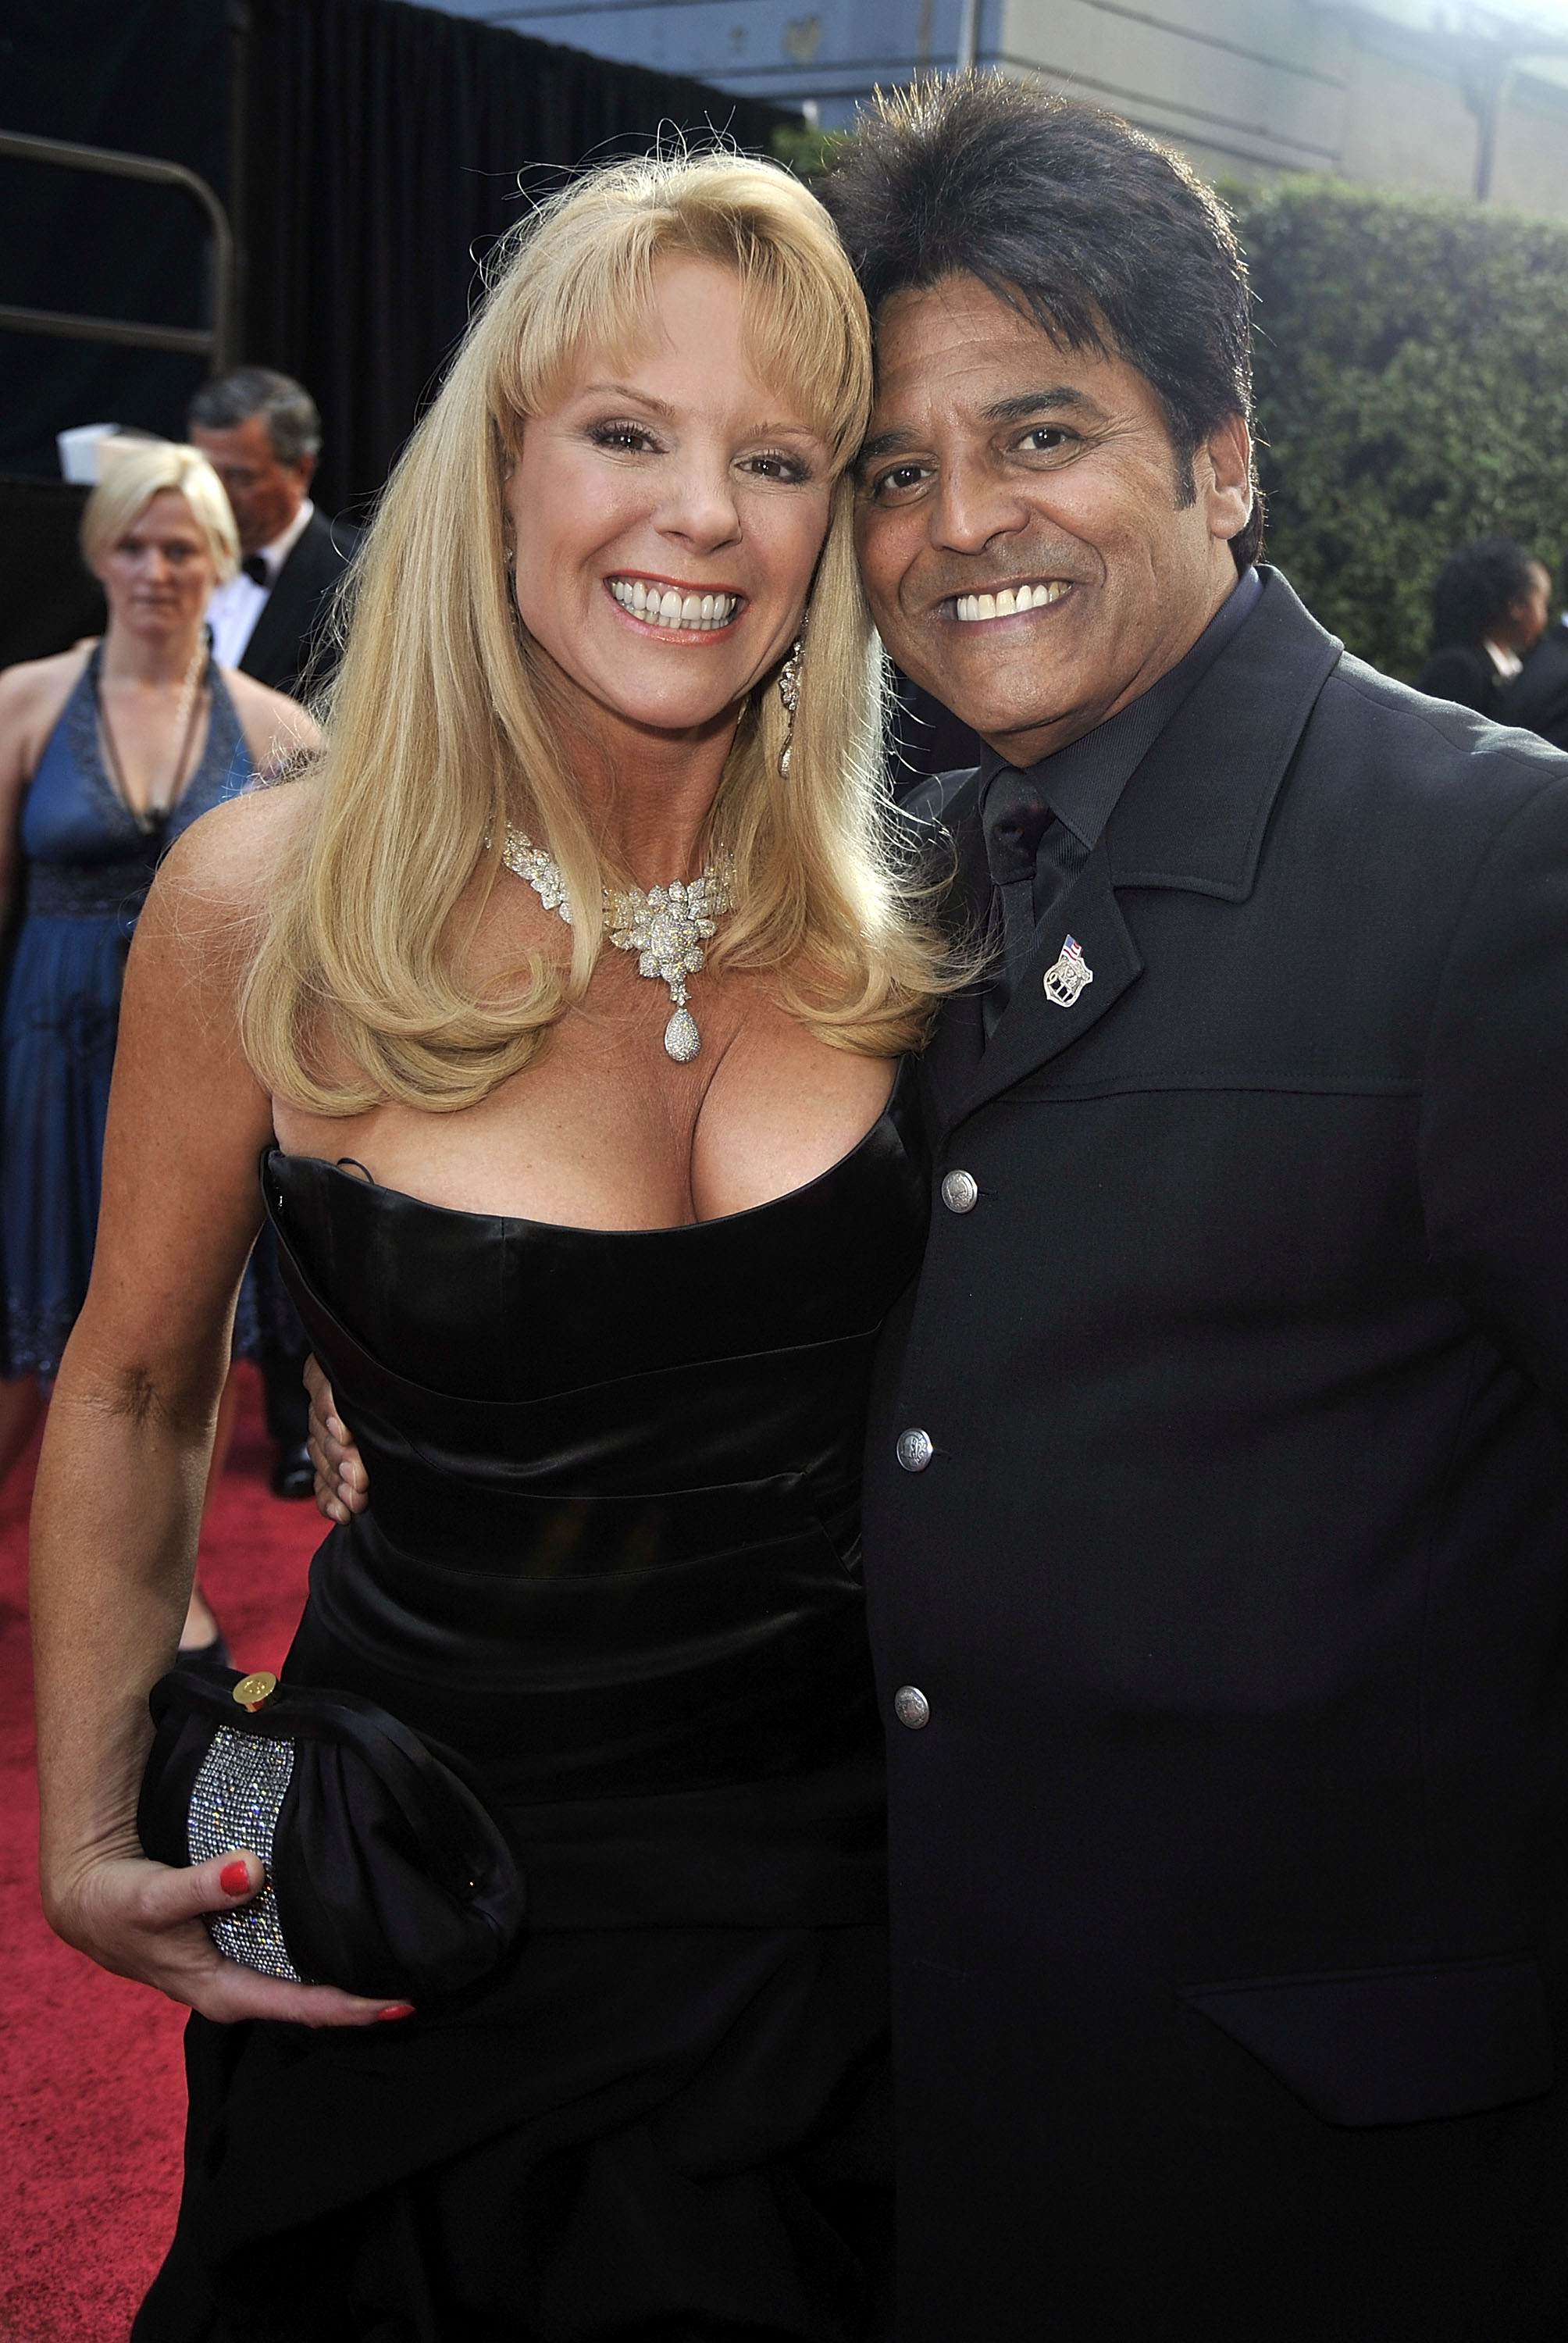 Co-hosts of The World's Funniest Moments arriving for the 36th Annual Daytime Emmy Awards